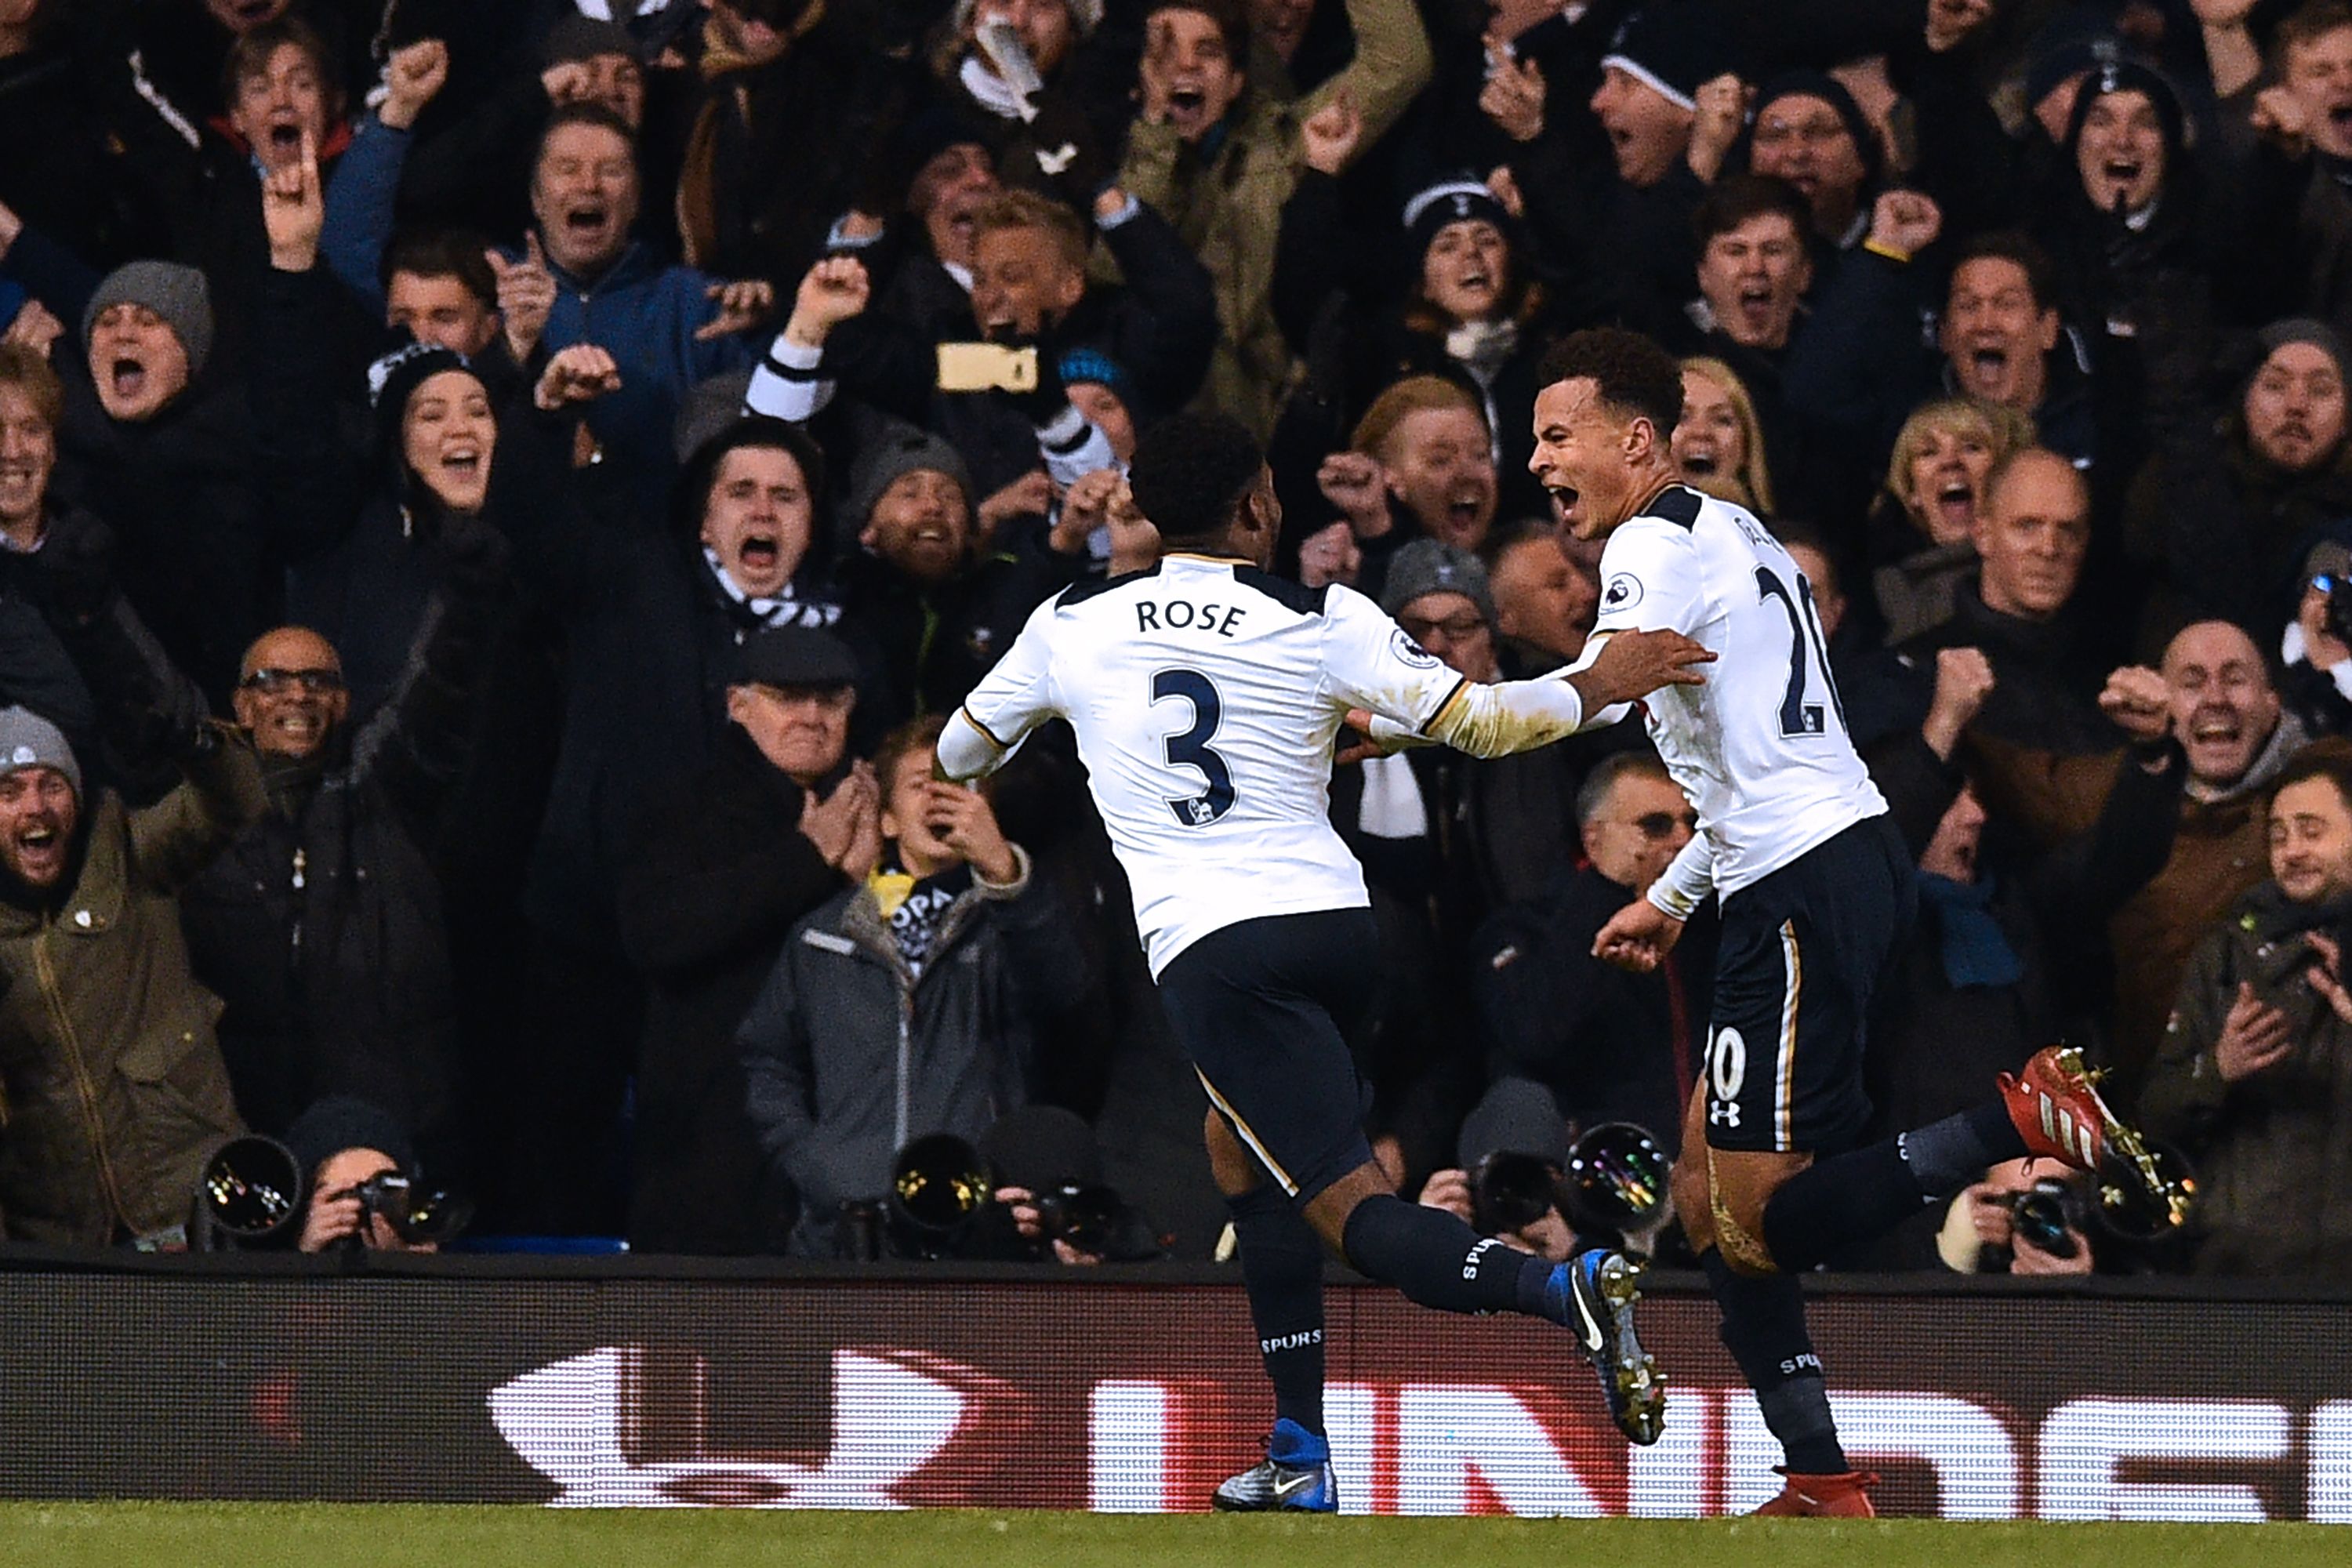 Tottenham Hotspur's English midfielder Dele Alli celebrates with Tottenham Hotspur's English defender Danny Rose (L) after scoring the opening goal of the English Premier League football match between Tottenham Hotspur and Chelsea at White Hart Lane in London, on January 4, 2017.       (Photo credit should read IKIMAGES/AFP/Getty Images)